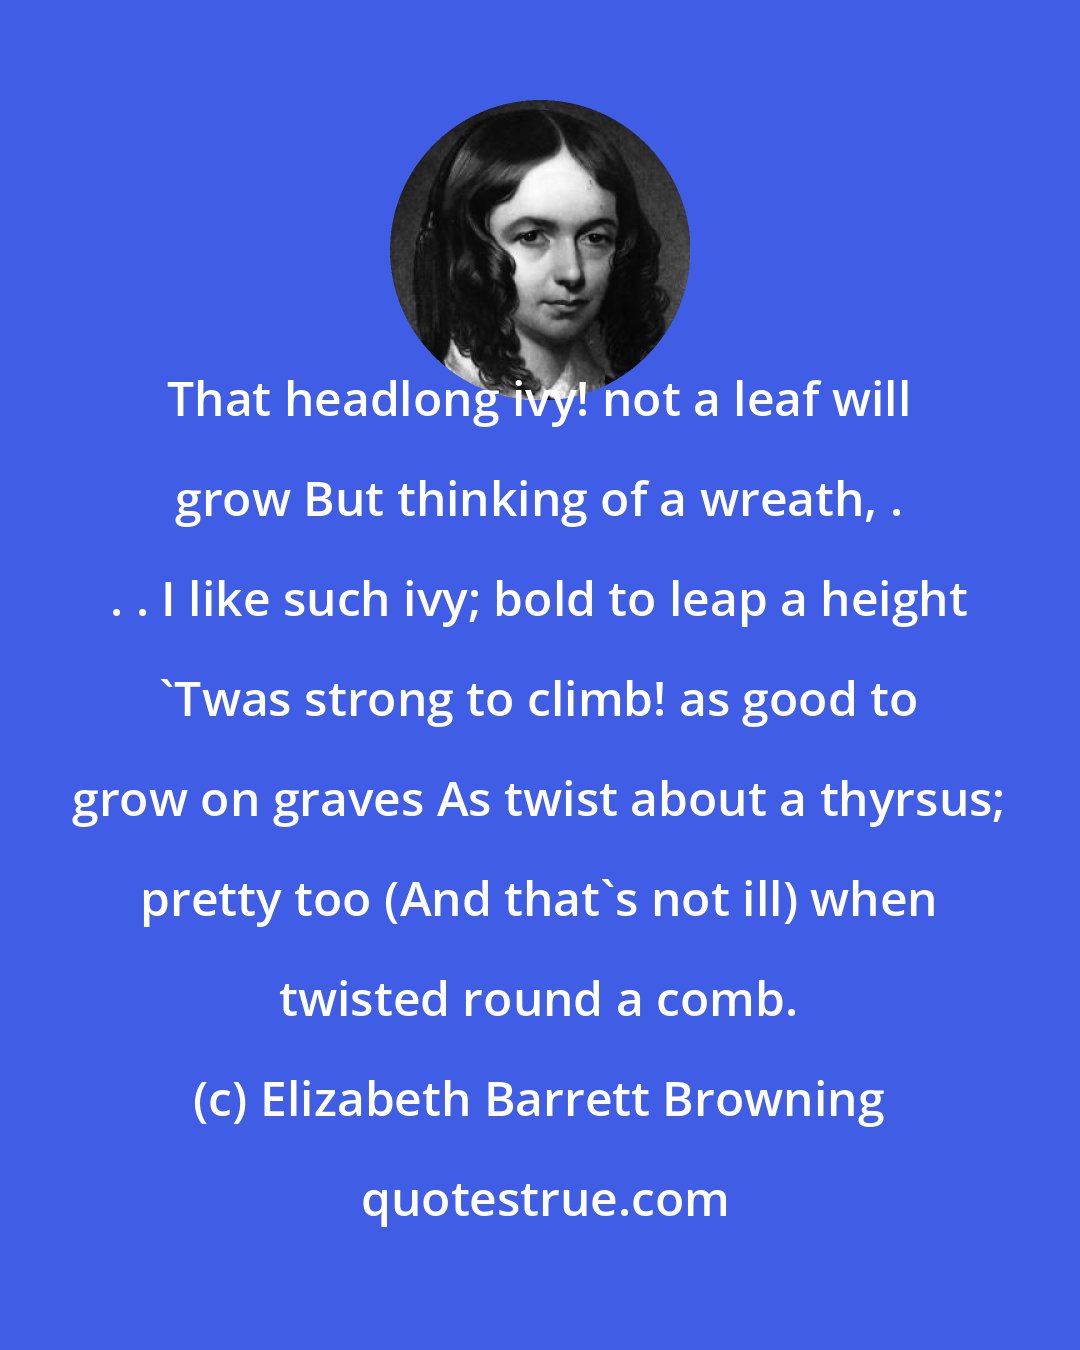 Elizabeth Barrett Browning: That headlong ivy! not a leaf will grow But thinking of a wreath, . . . I like such ivy; bold to leap a height 'Twas strong to climb! as good to grow on graves As twist about a thyrsus; pretty too (And that's not ill) when twisted round a comb.